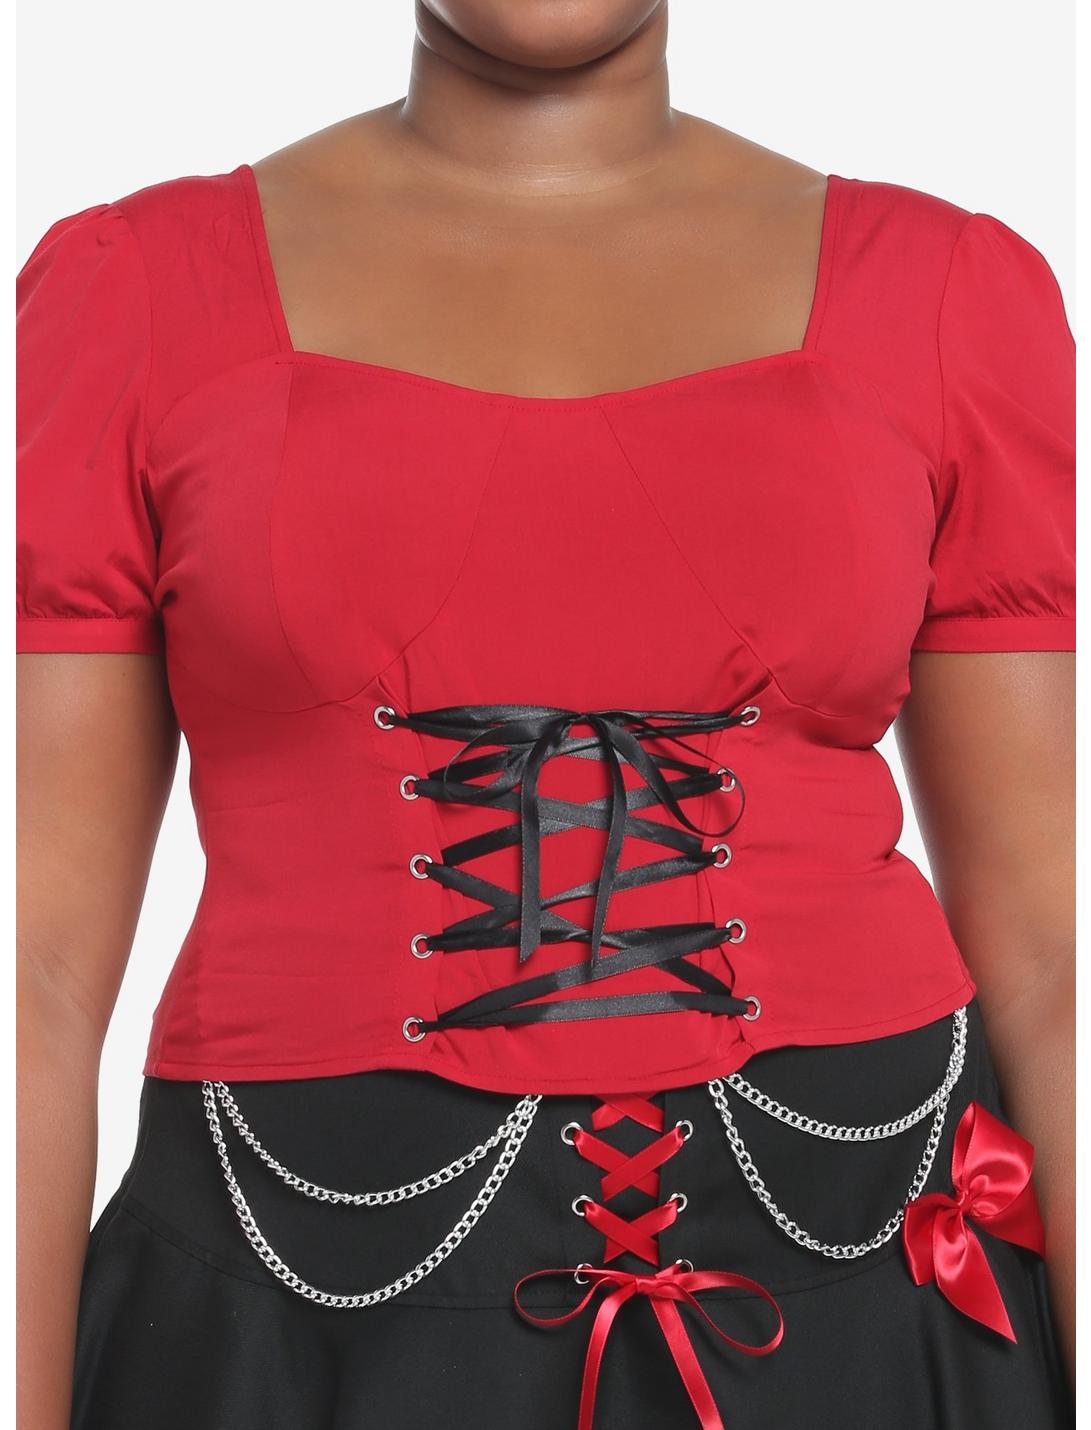 Red & Black Corset Lace-Up Girls Crop Top Plus Size, RED, hi-res